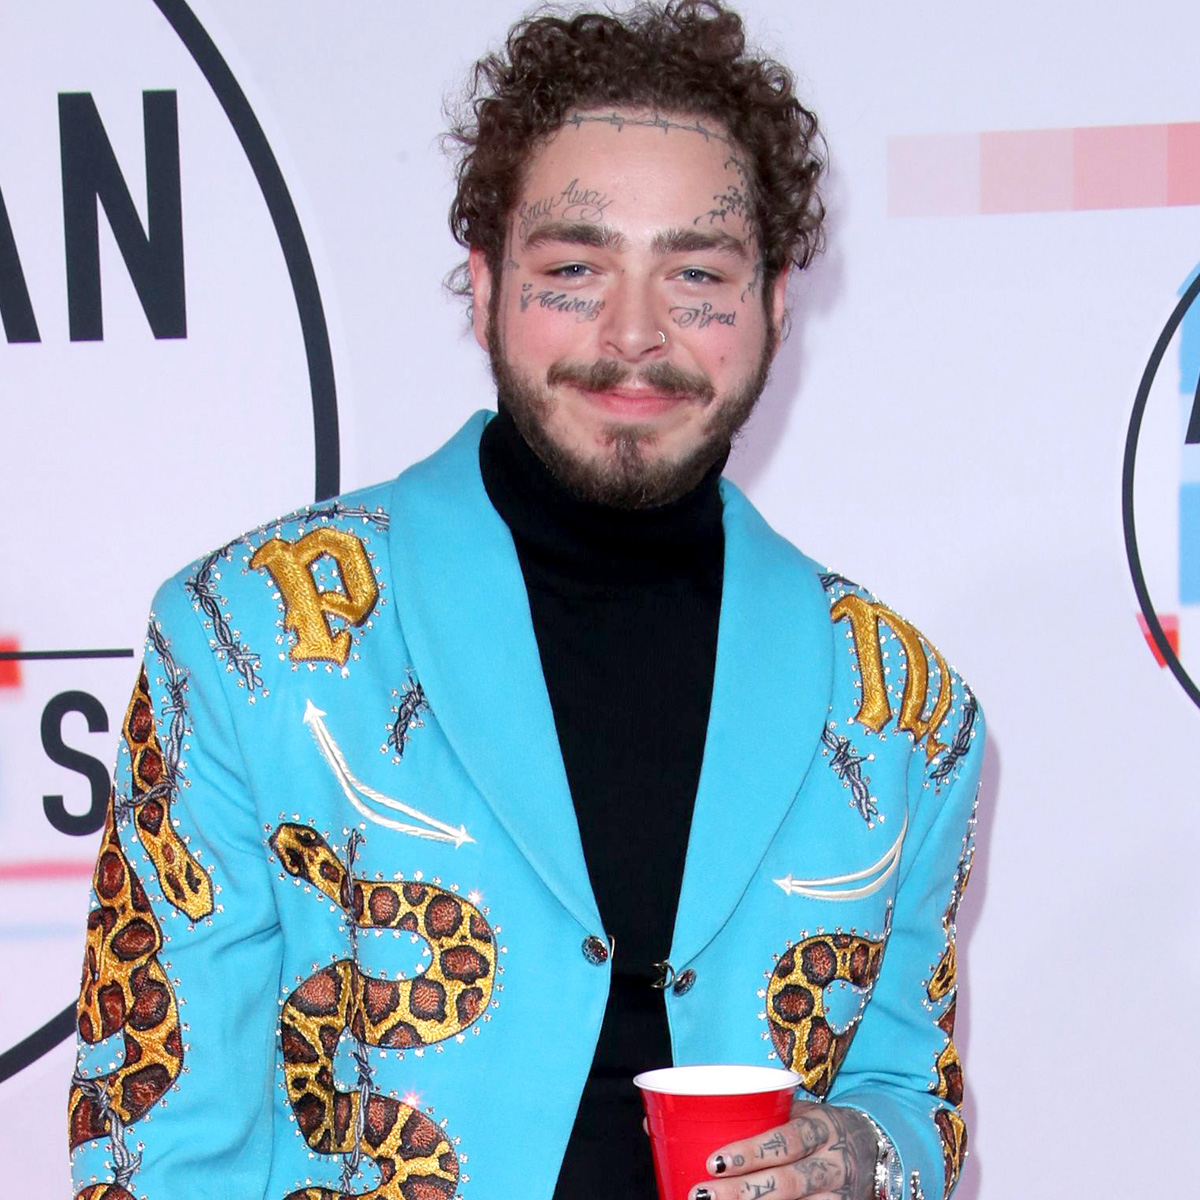 Post Malone Speaks Out After Falling Onstage and Injuring Ribs